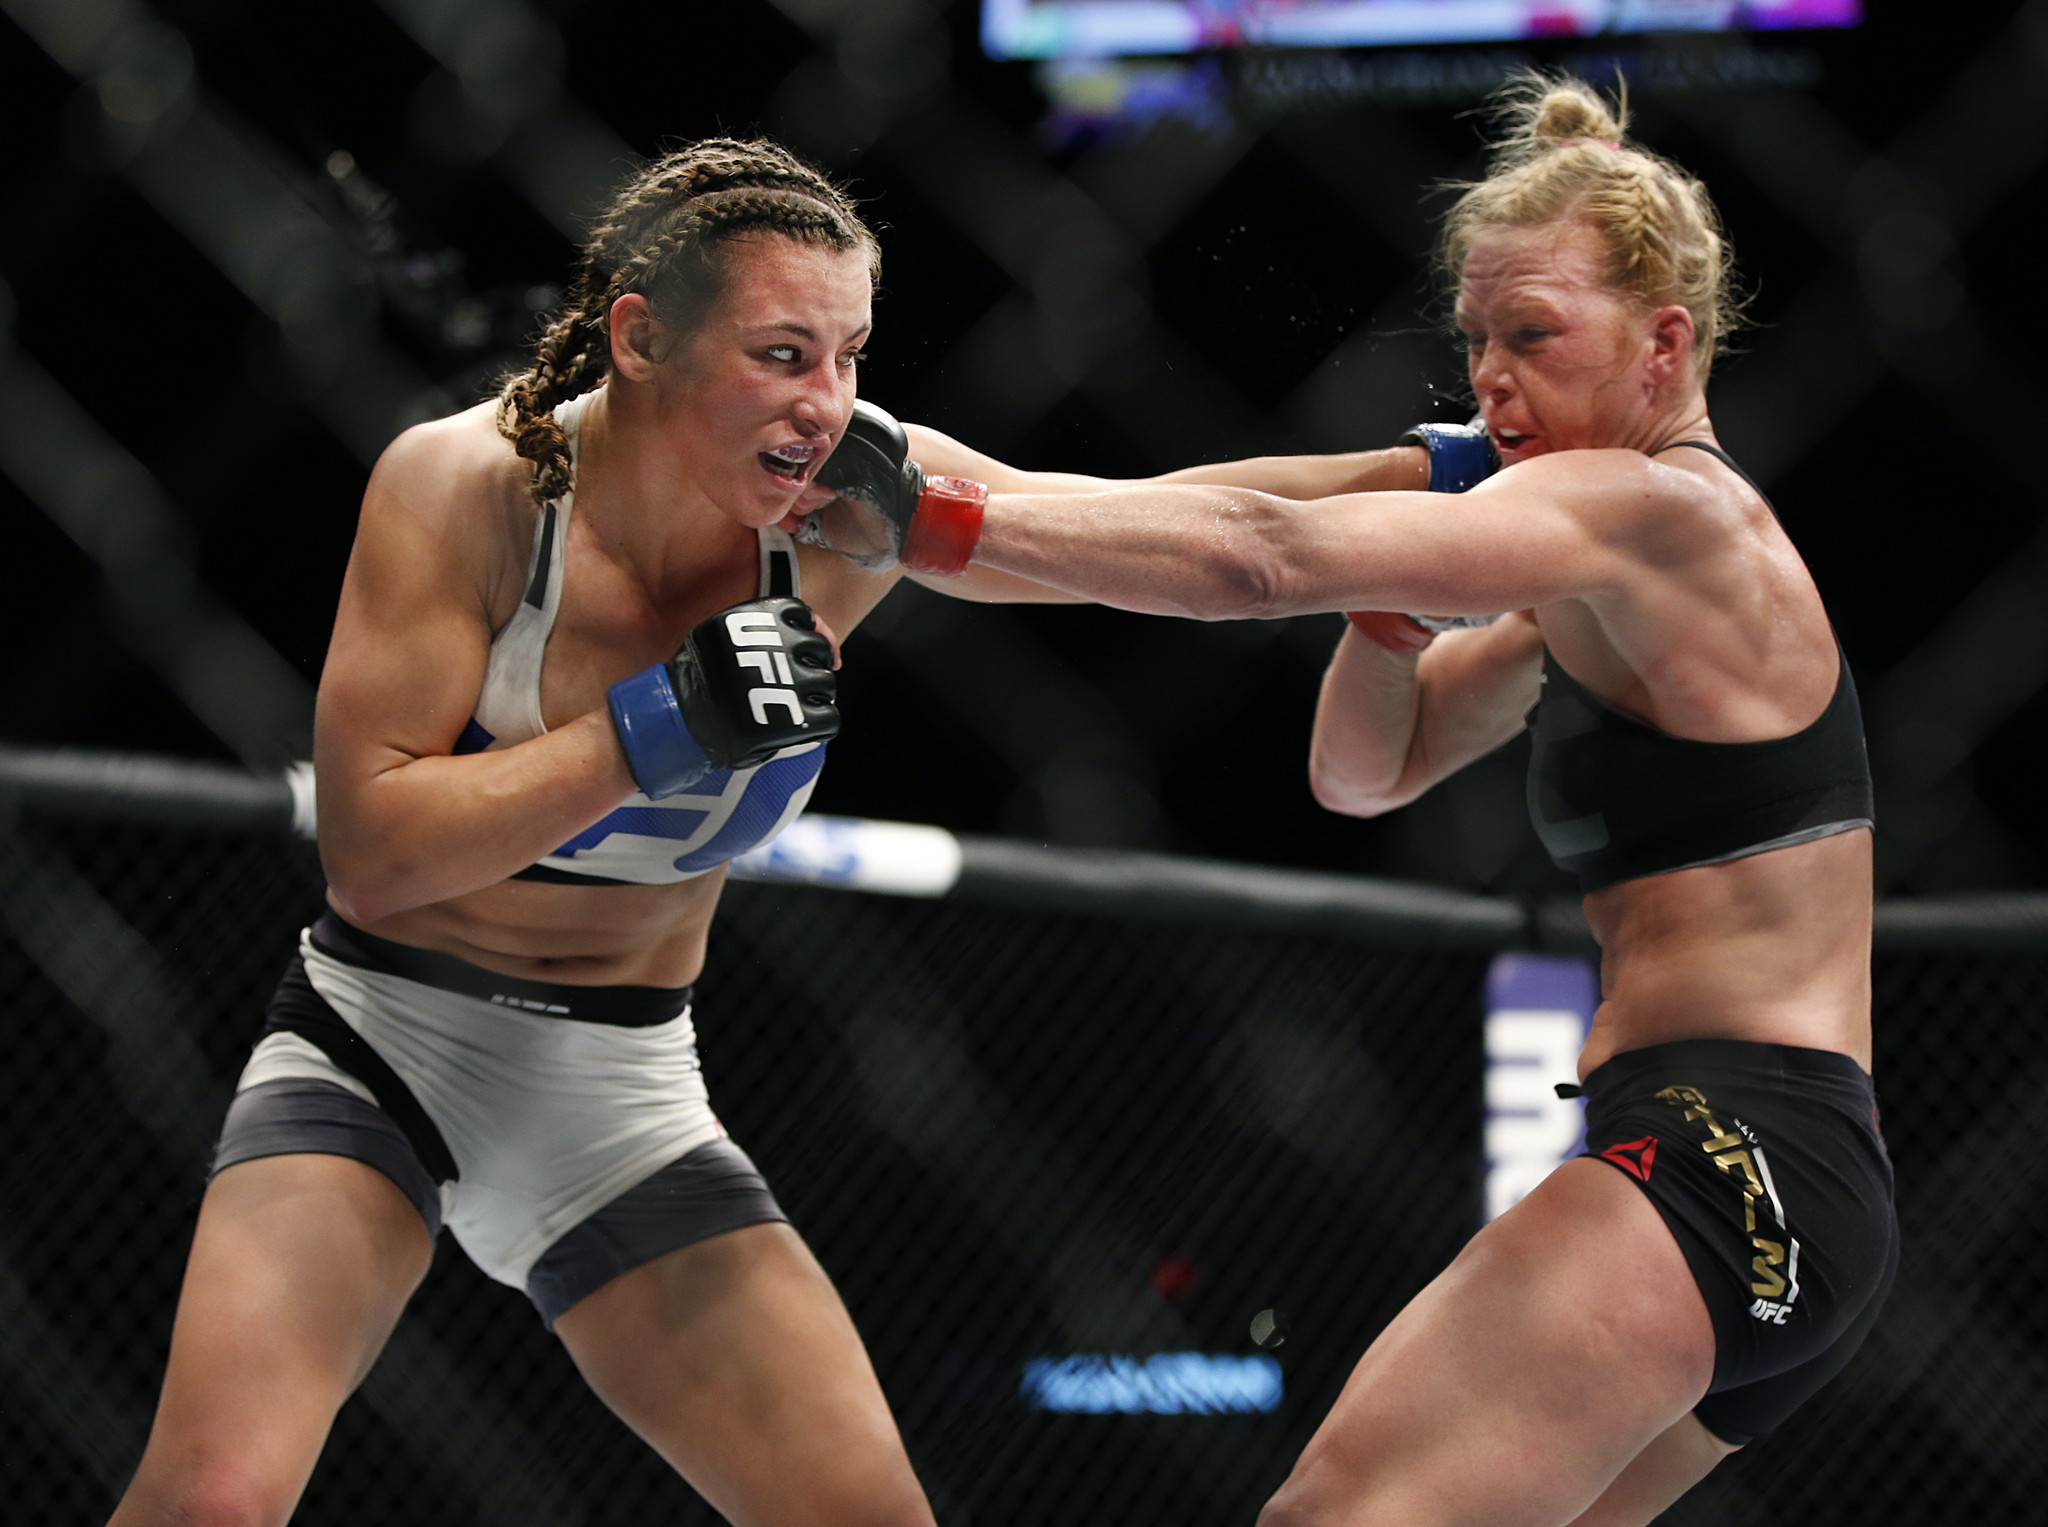 MMA rankings: Holly Holm's grave miscalculation costs her - LA Times